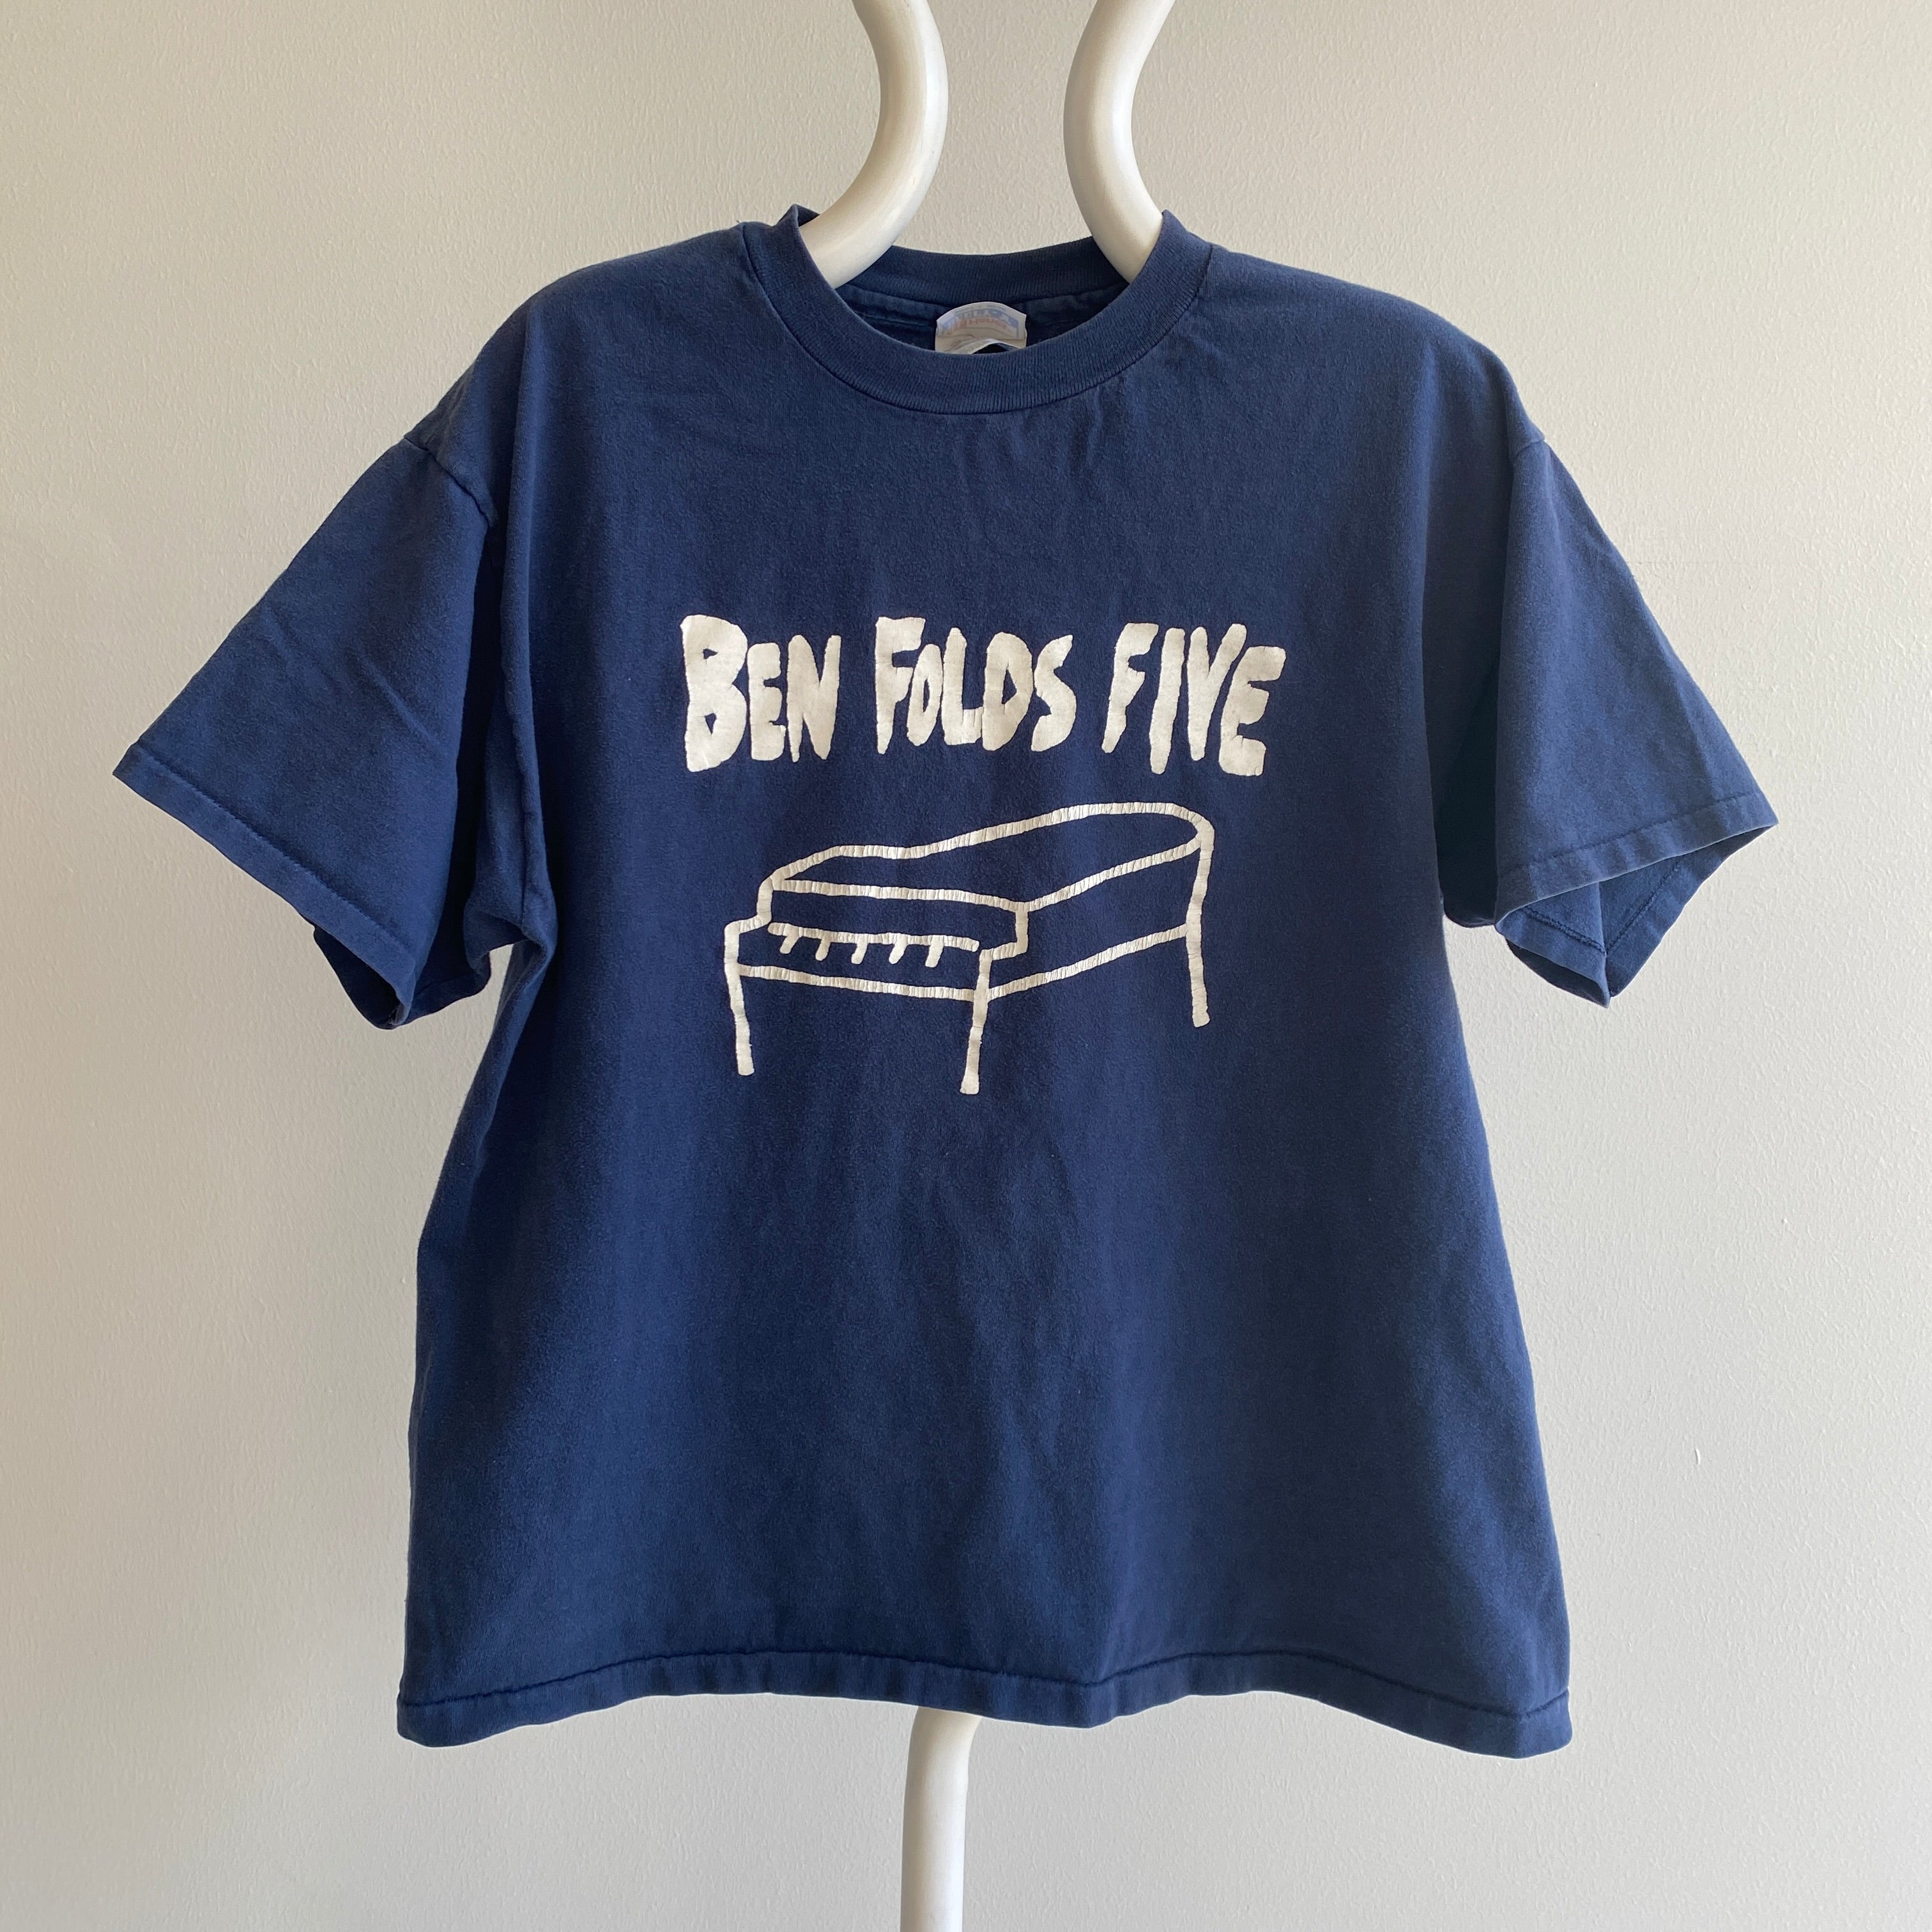 1995 Ben Folds Five Album T-Shirt - Who Remembers These Guys?!